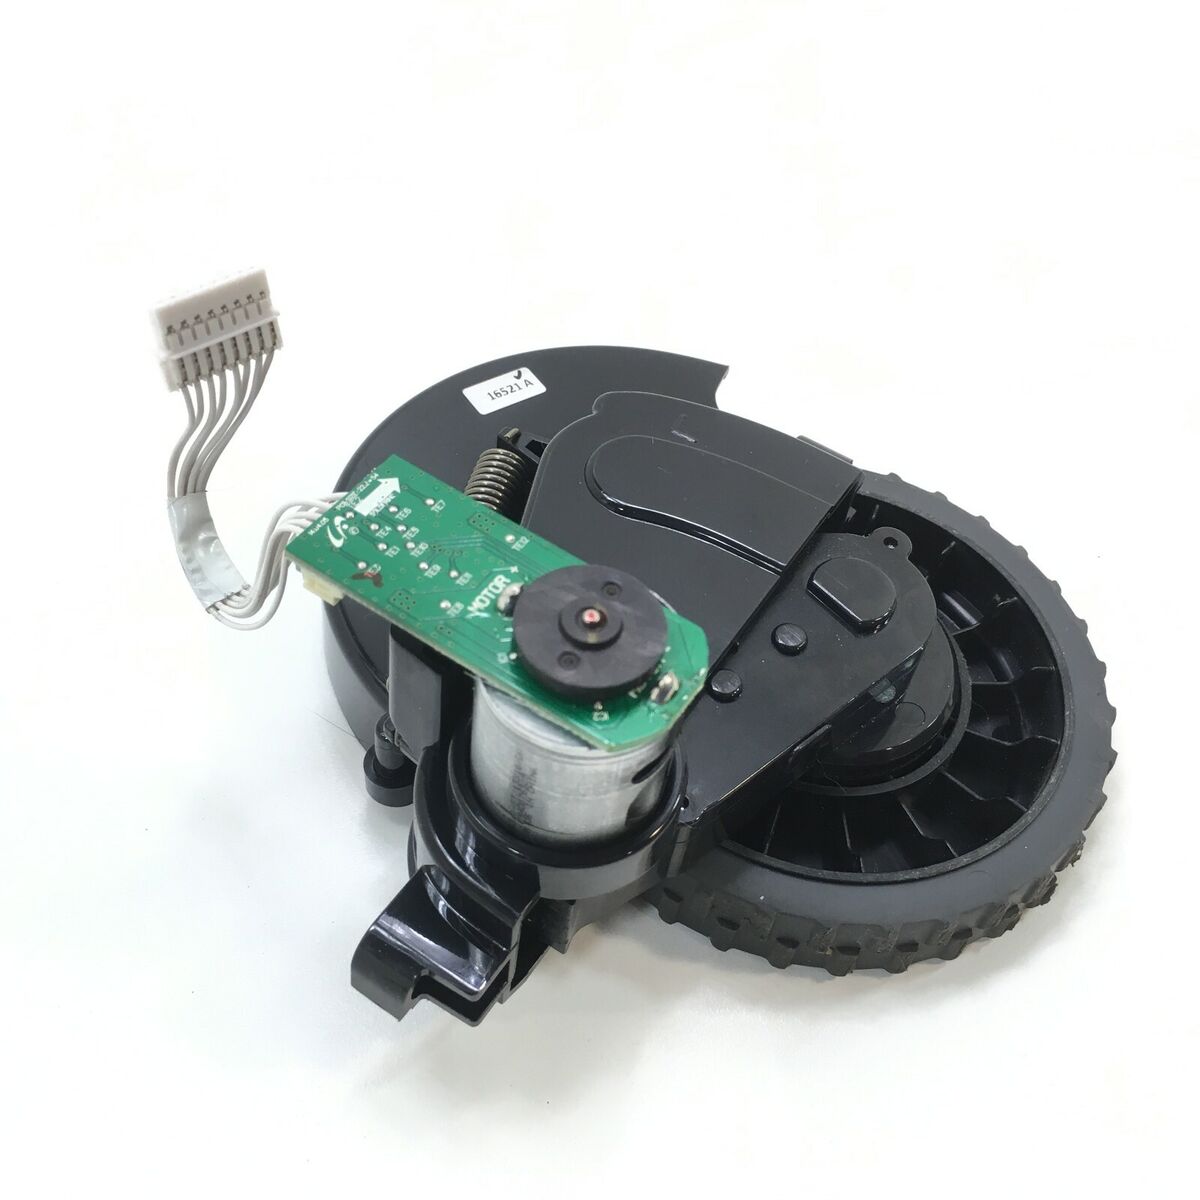 The wheel of the samsung robotic pump on the left side. ASSY WHEEL-LEFT; VR9000H,ASSY WHEEL DRIVI Vacuum cleaner motors batteries battery chargers